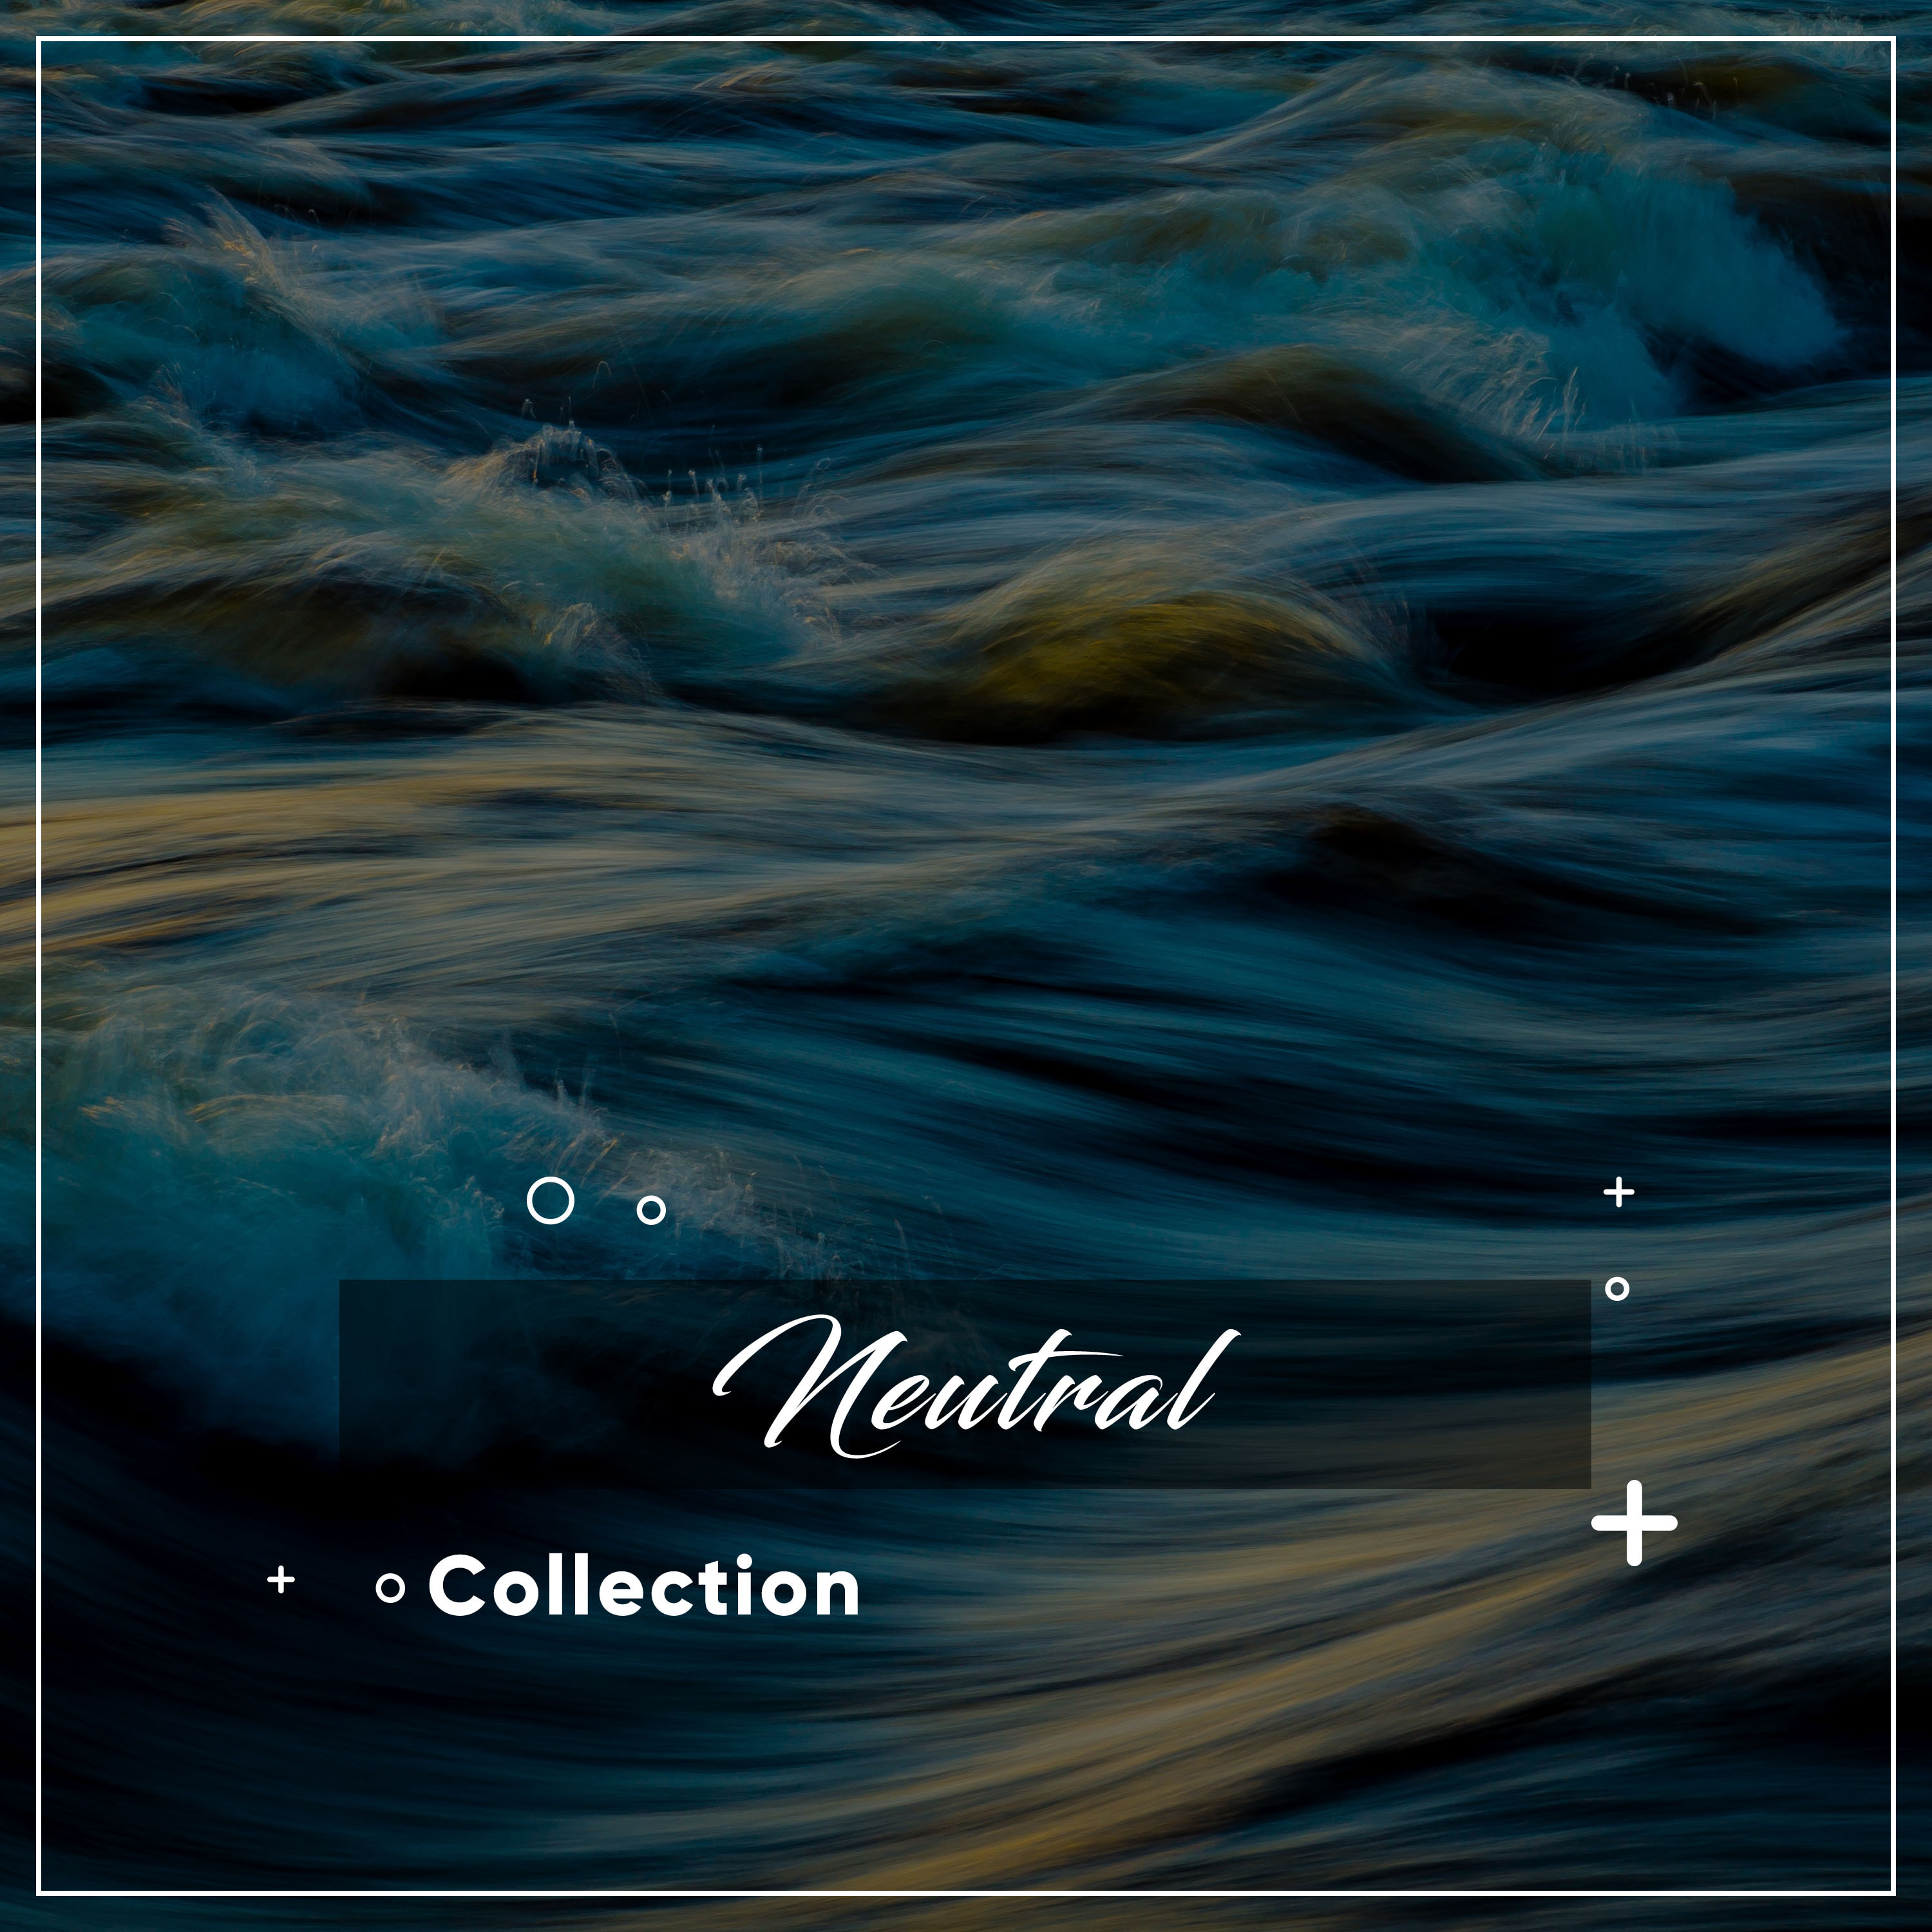 #17 Neutral Collection for Spa Relaxation or Meditative Calm